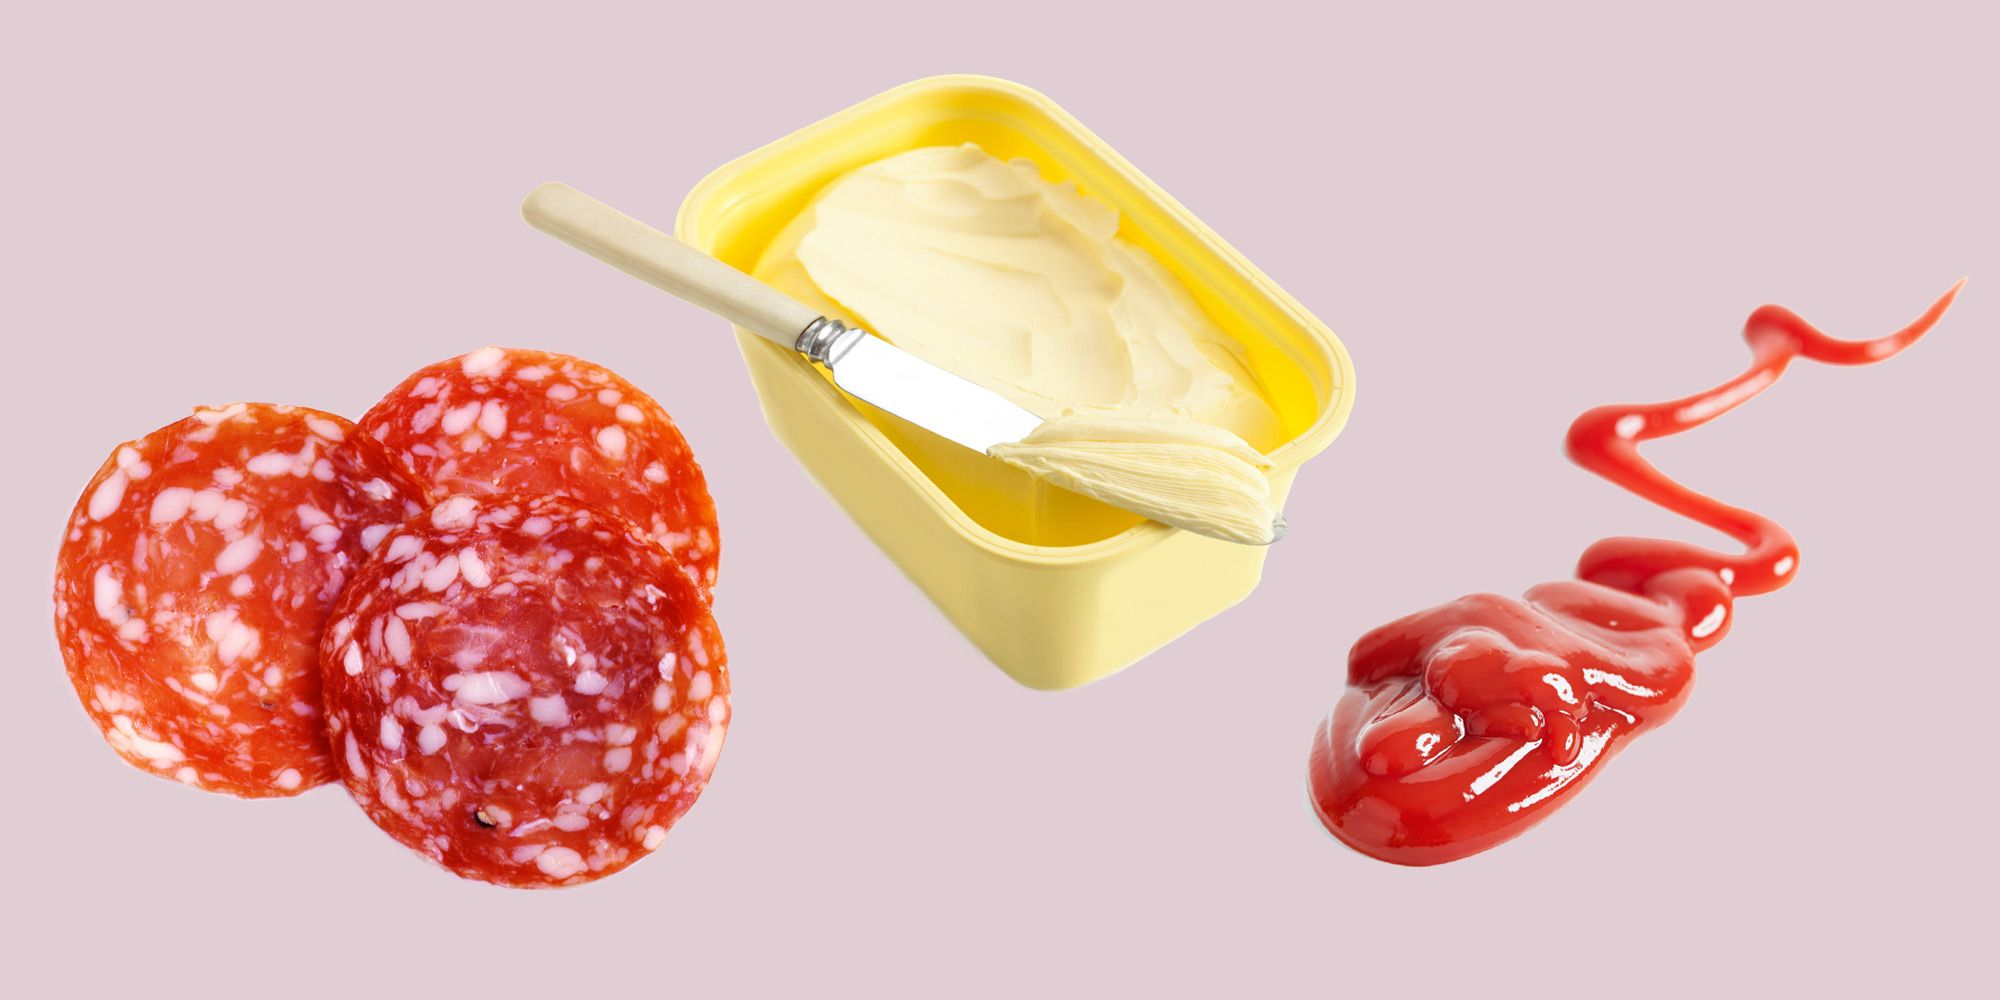 11 foods nutritionists say they'll NEVER eat